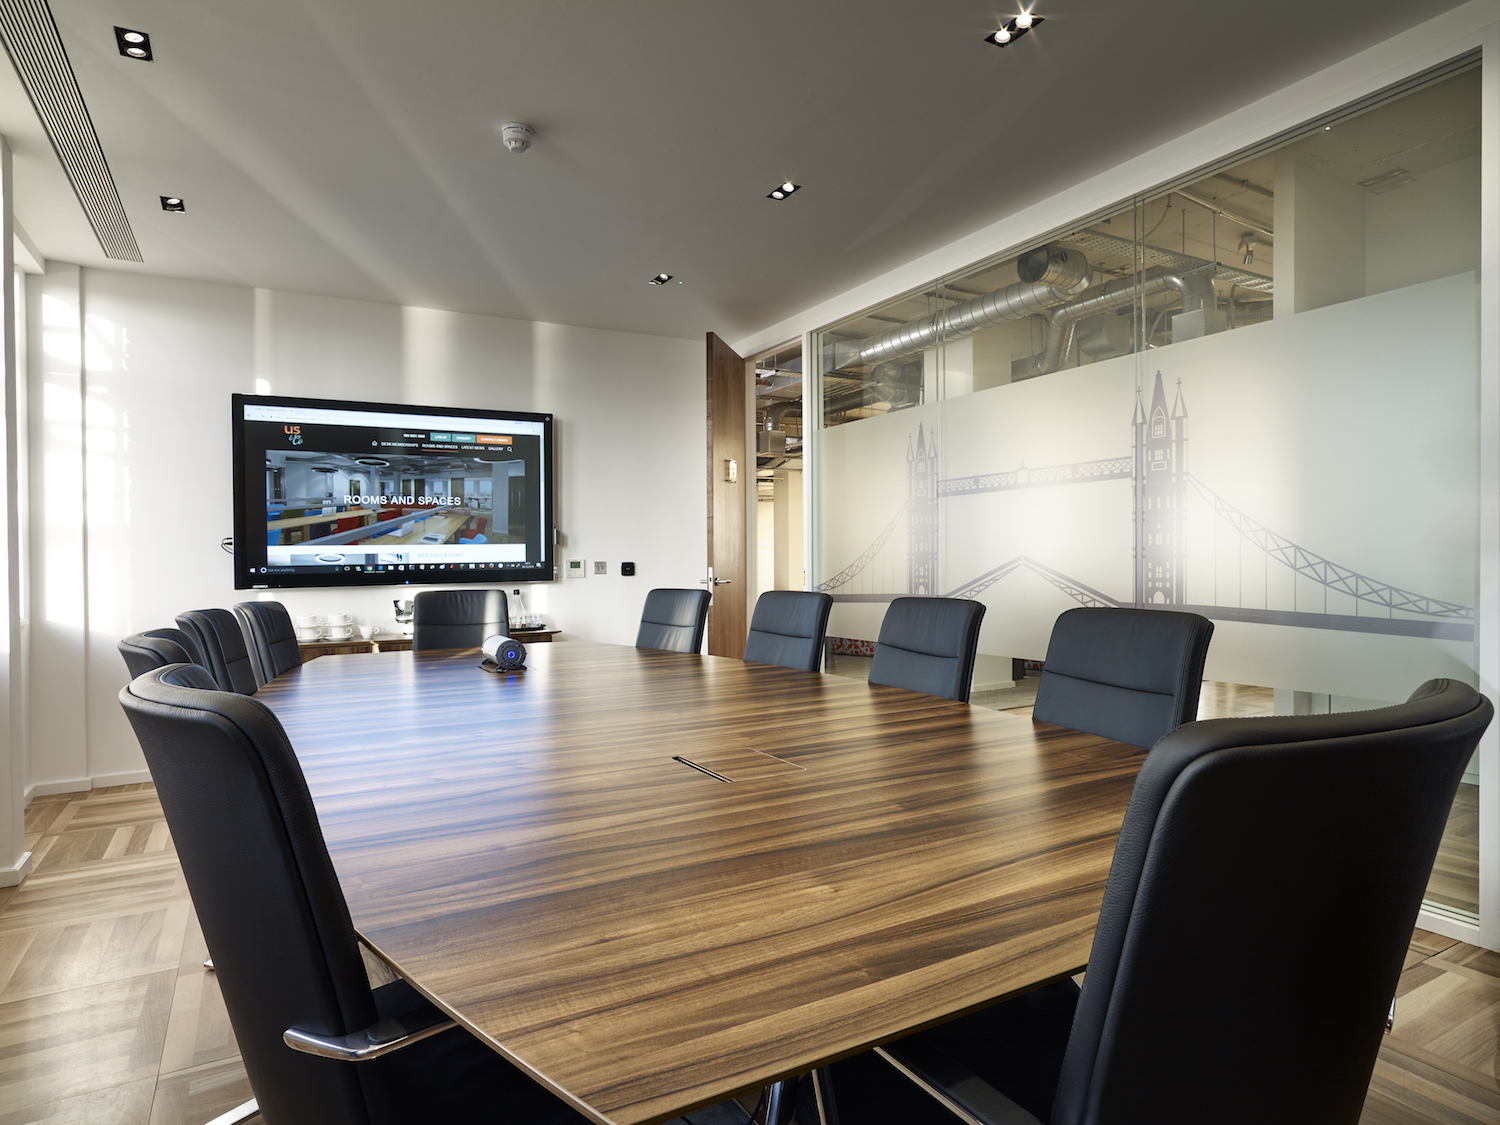 Us&co Boardroom - perfect for private meetings